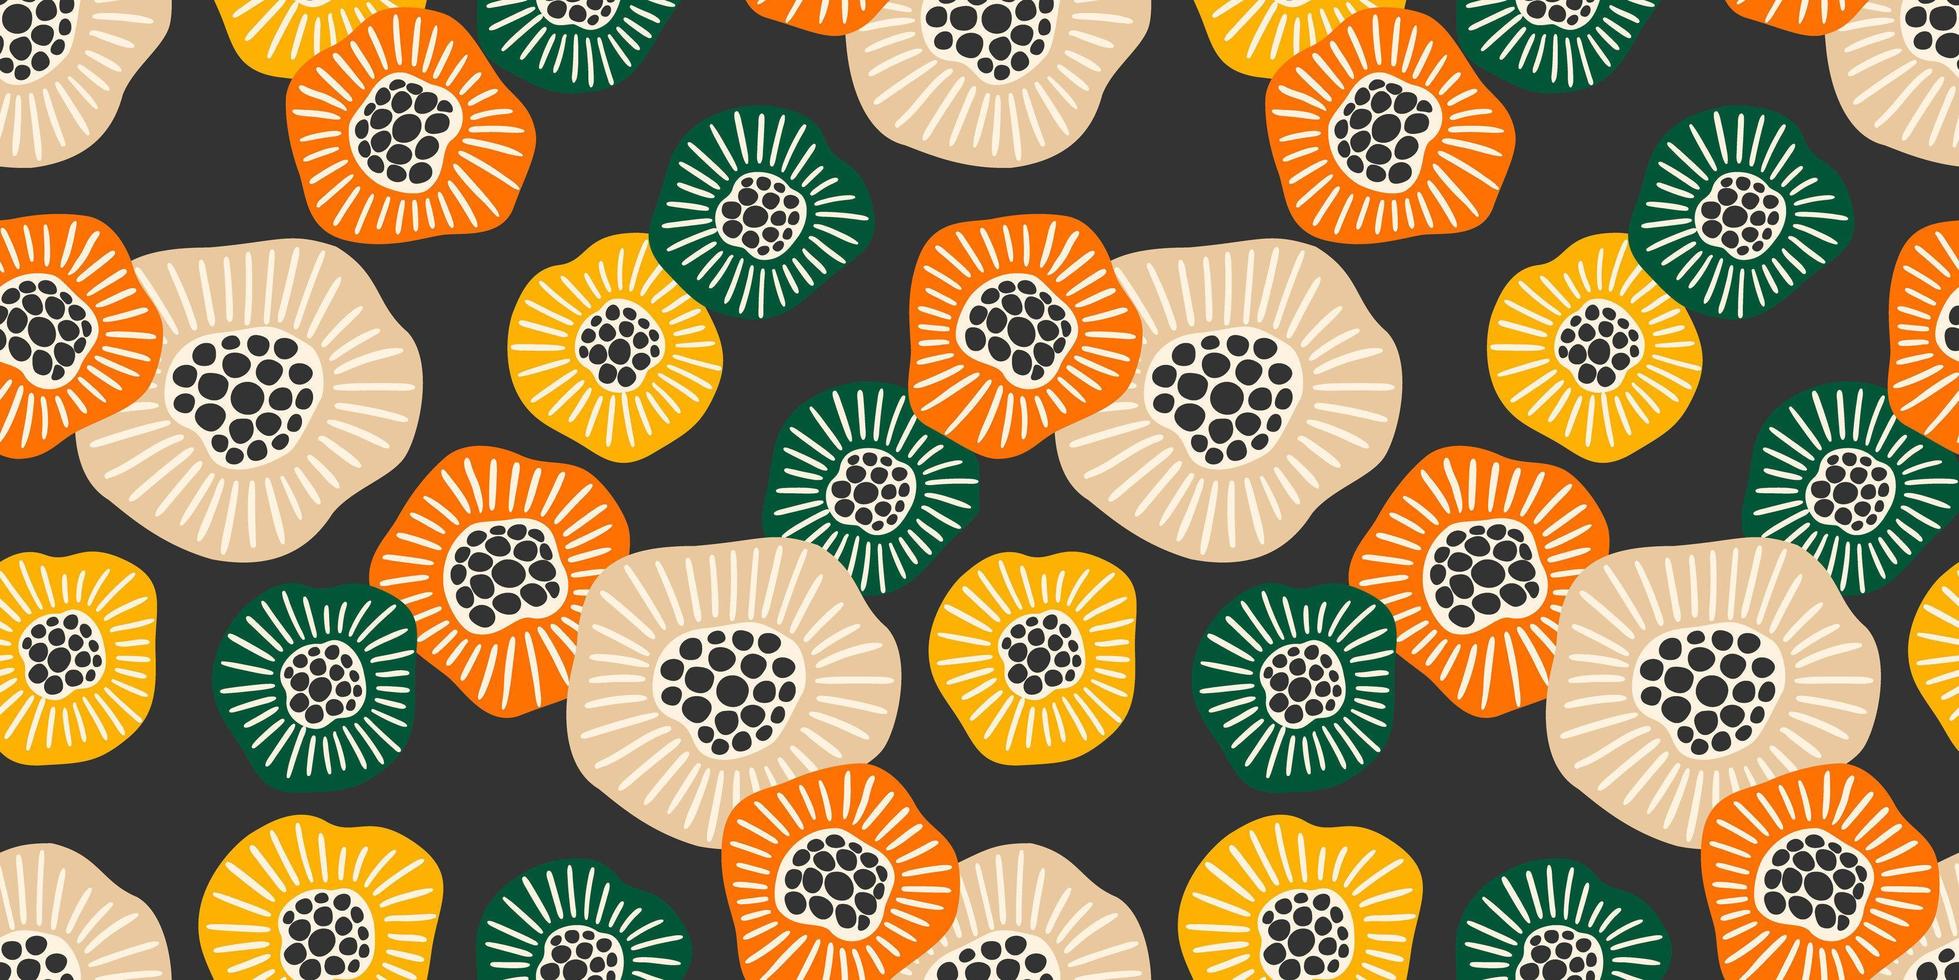 Abstract gentle seamless pattern with flowers. Modern design for paper, cover, fabric, interior decor and other vector